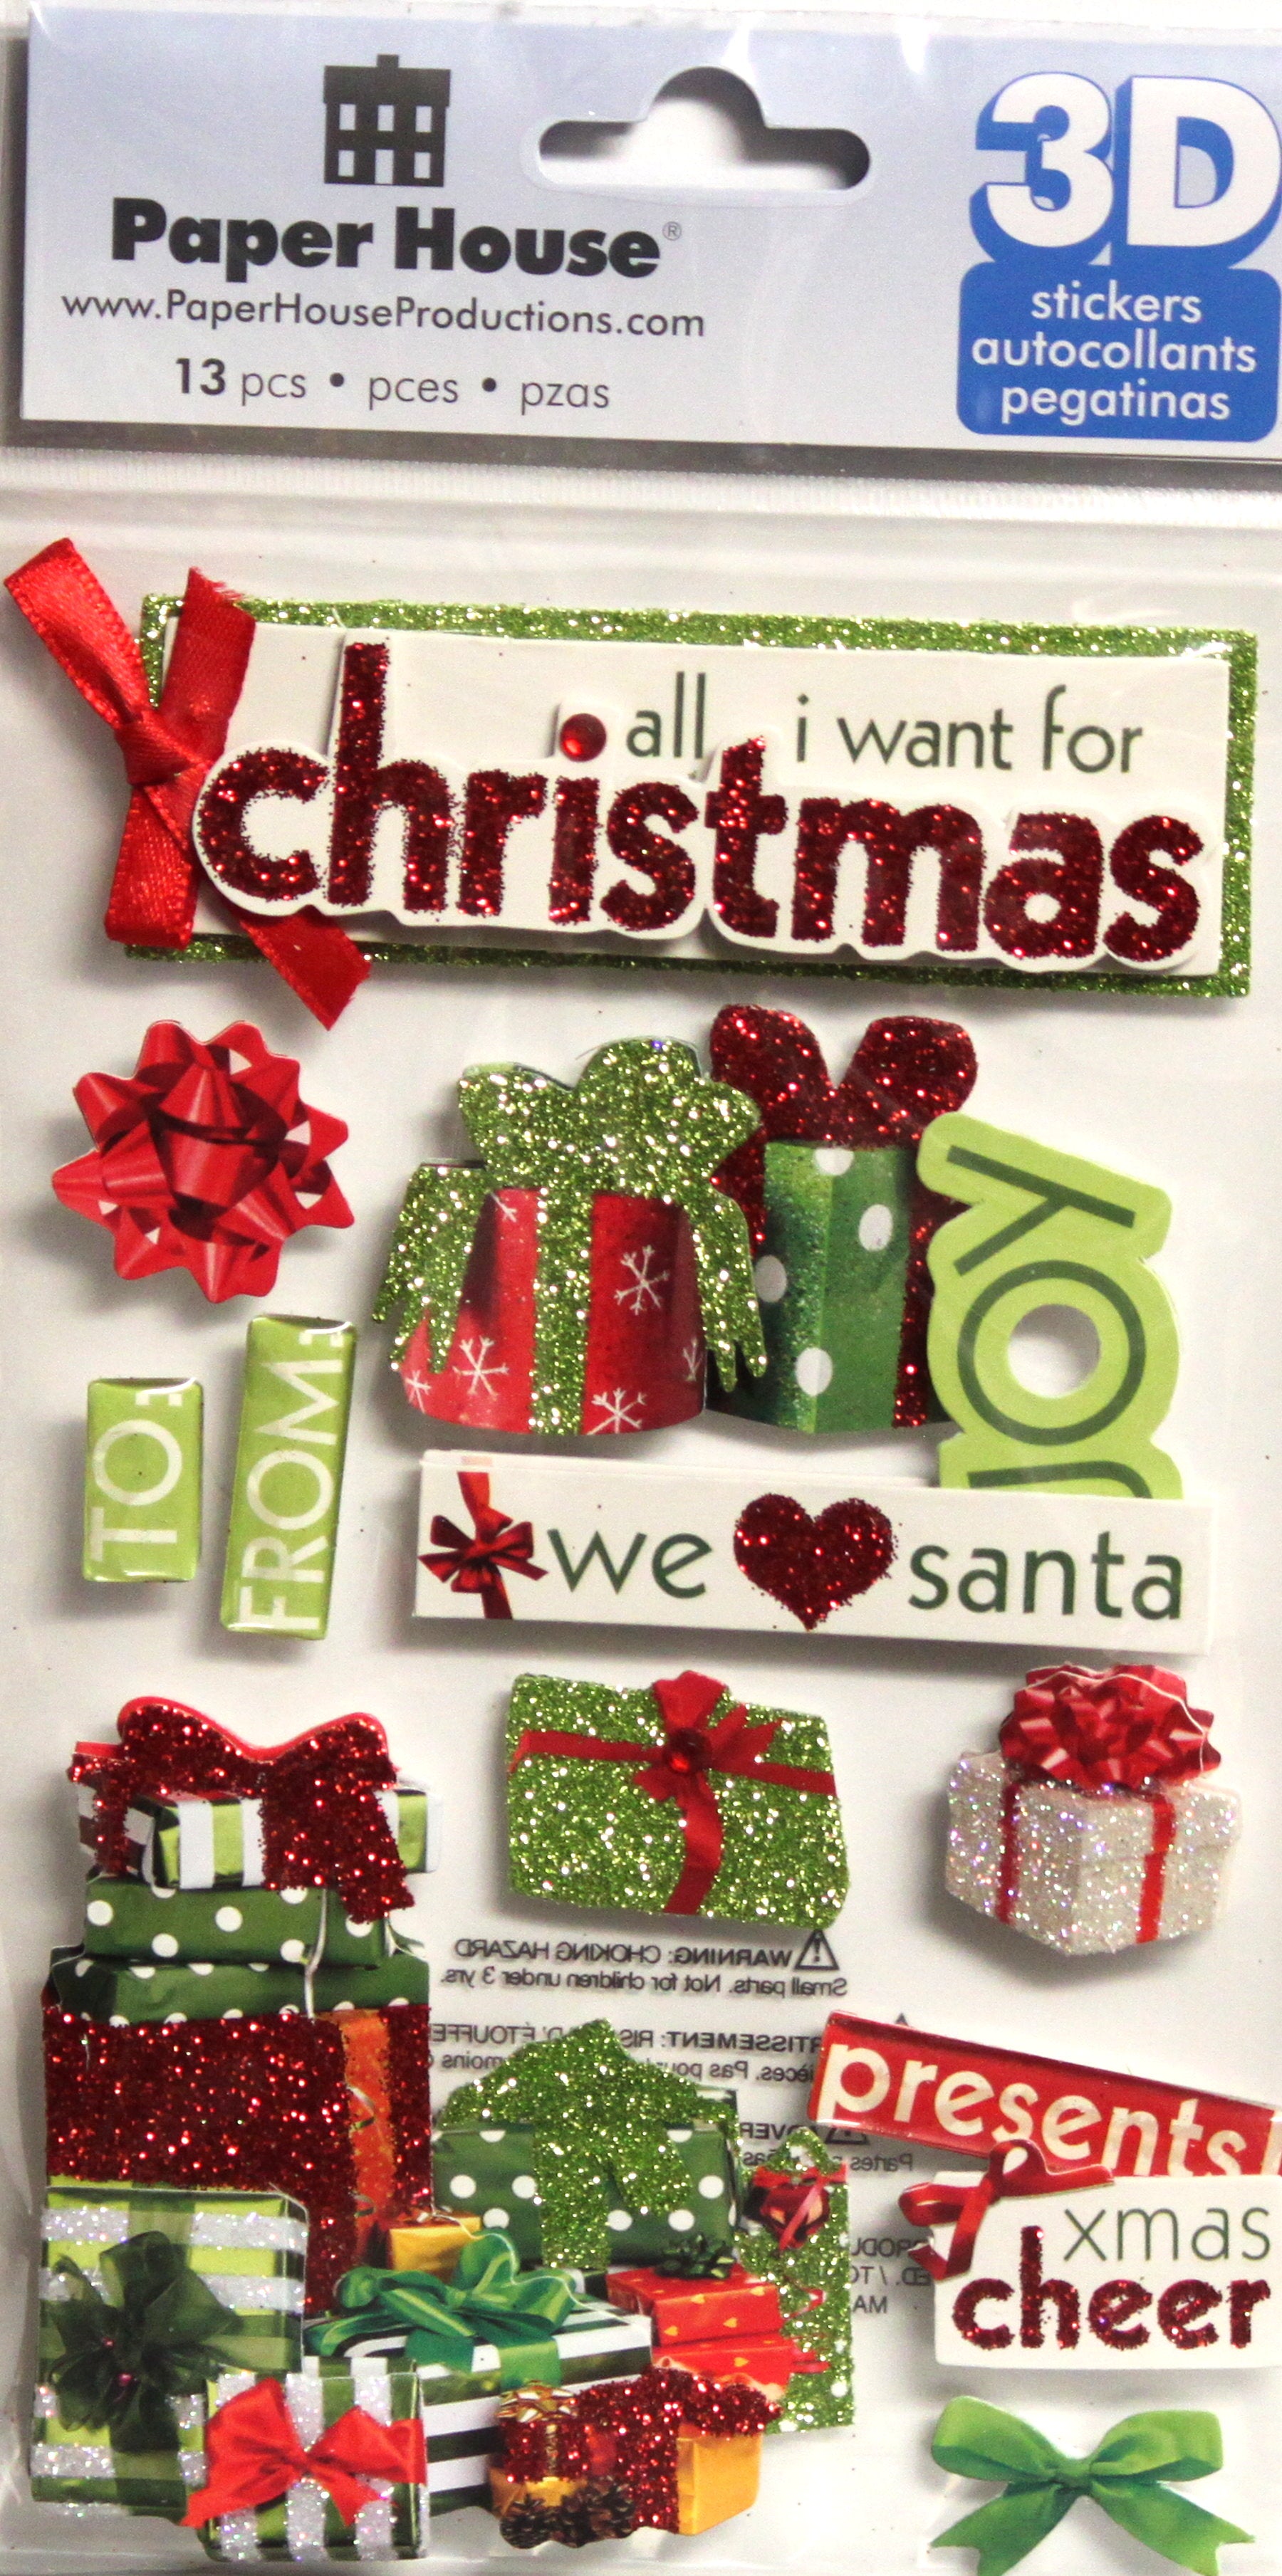 Paper House 3D Dimensional All I Want For Christmas Stickers